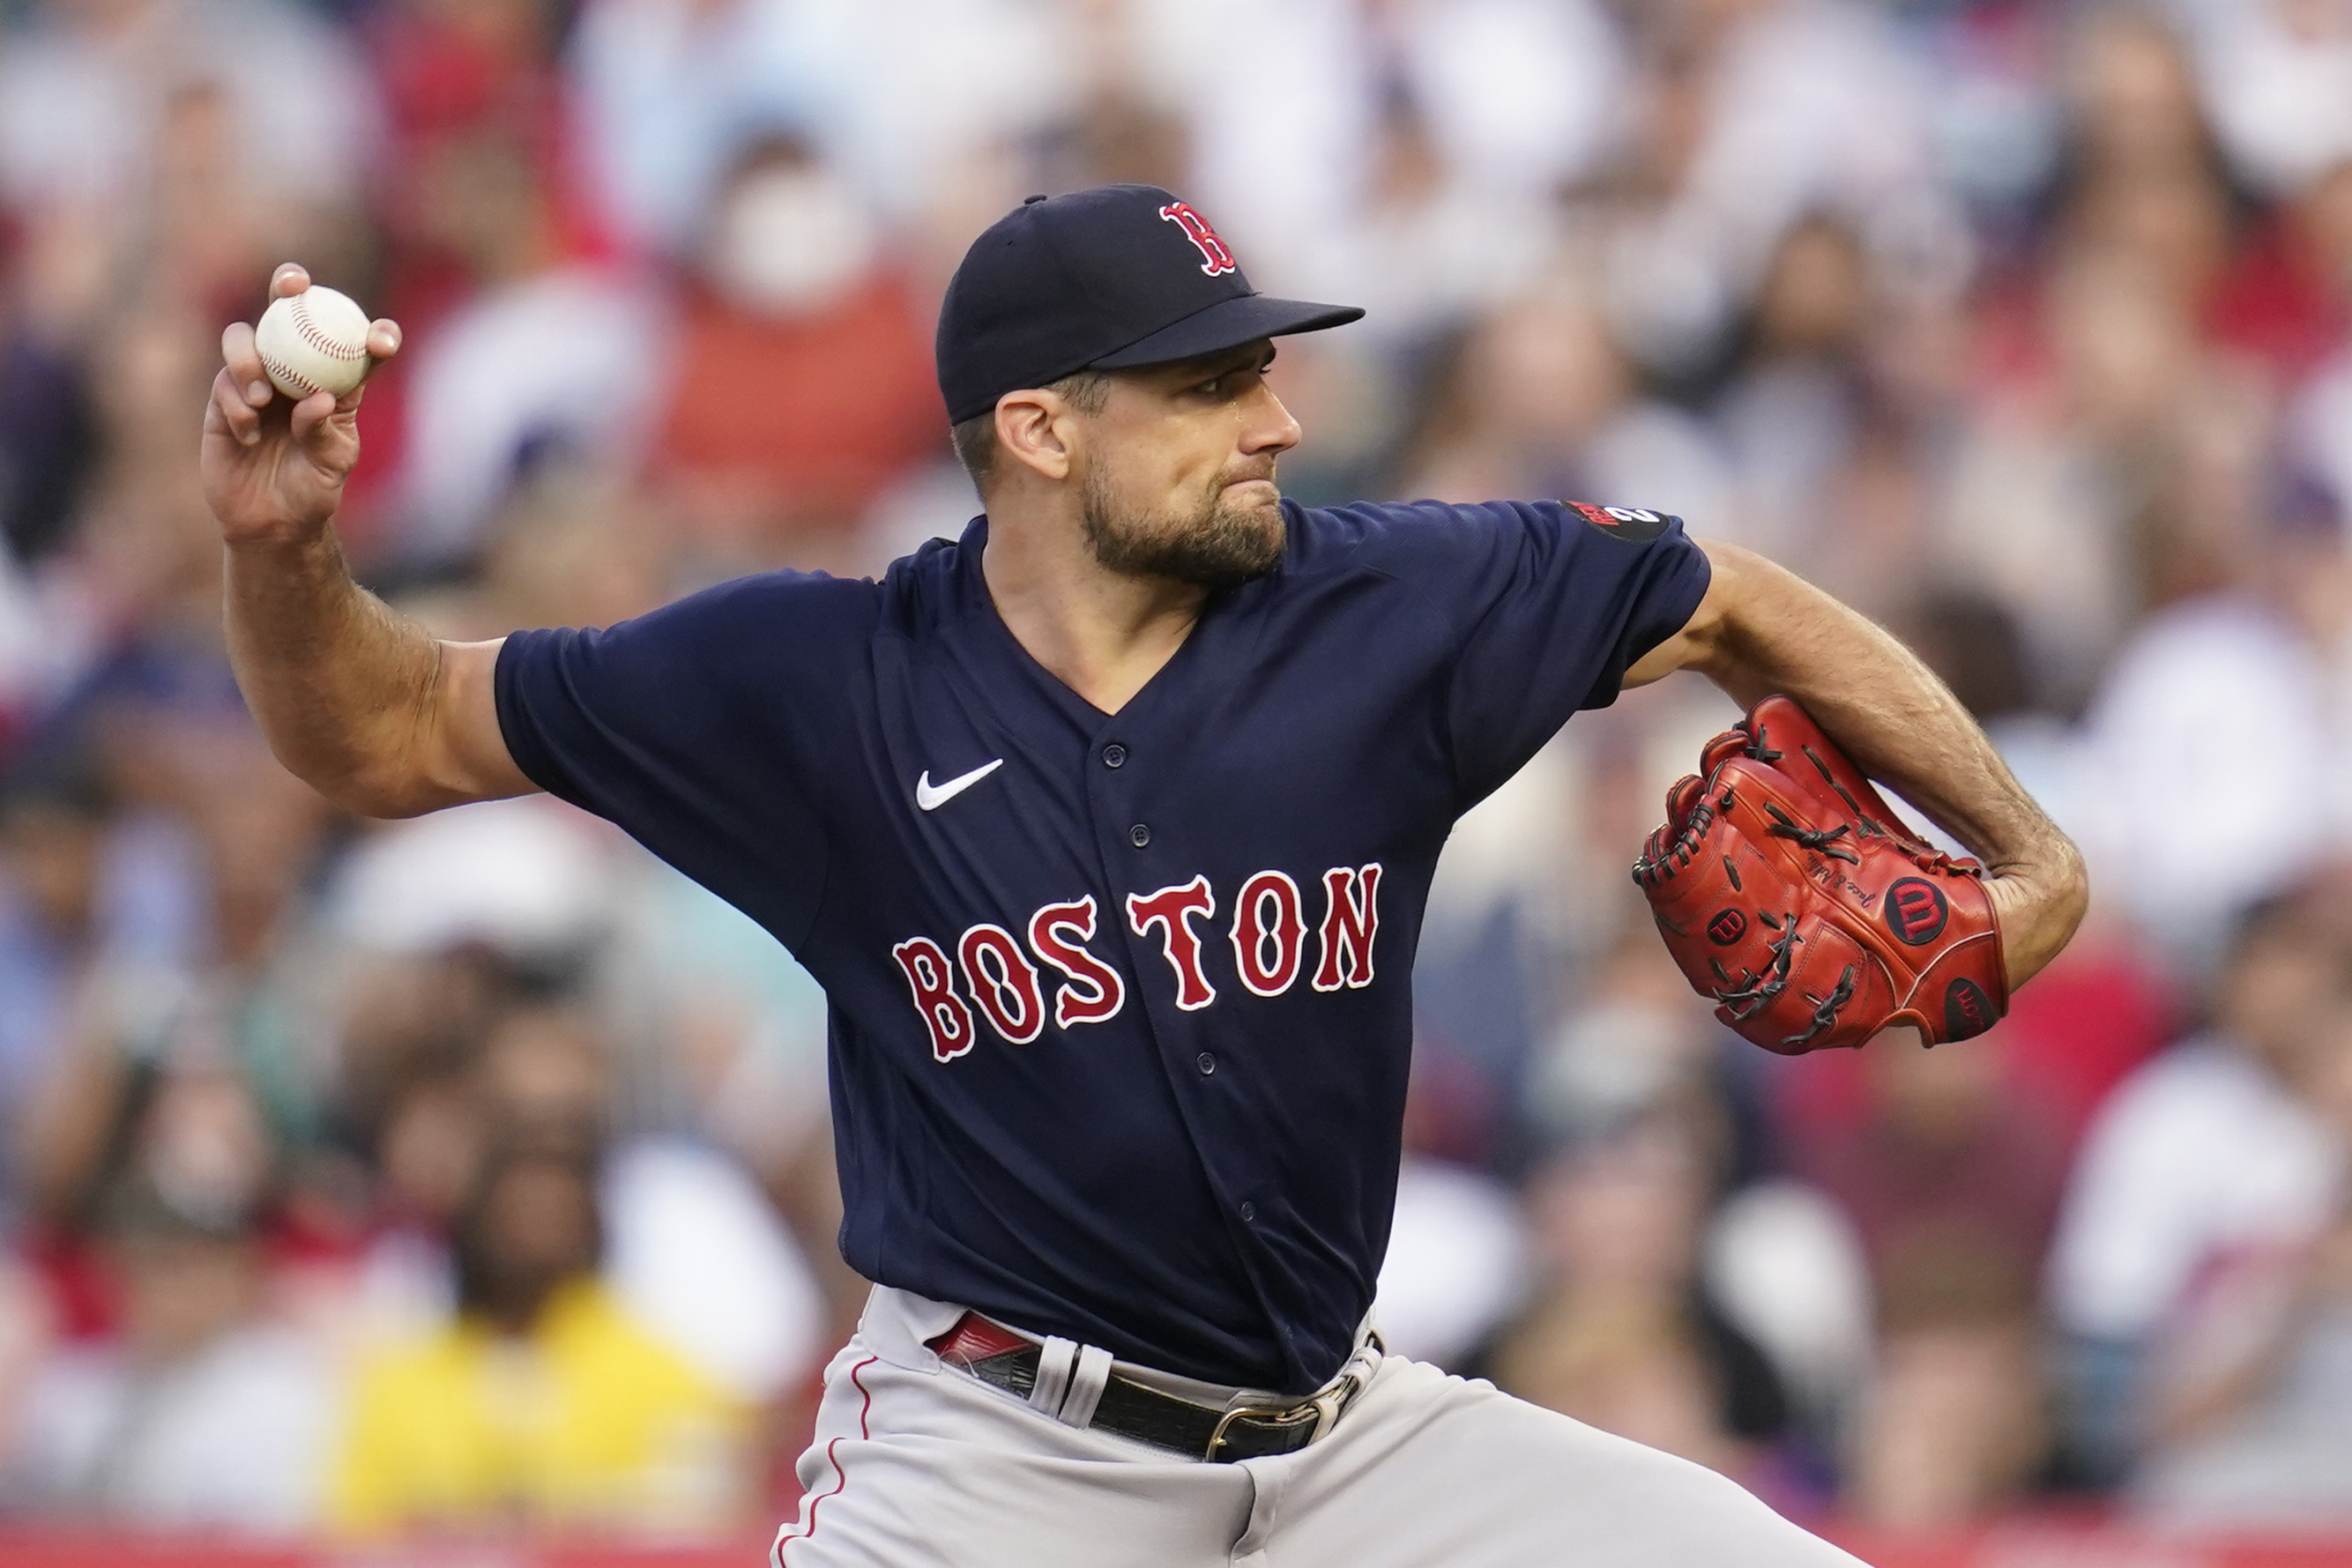 Nathan Eovaldi net worth 2022: What is Eovaldi's salary?